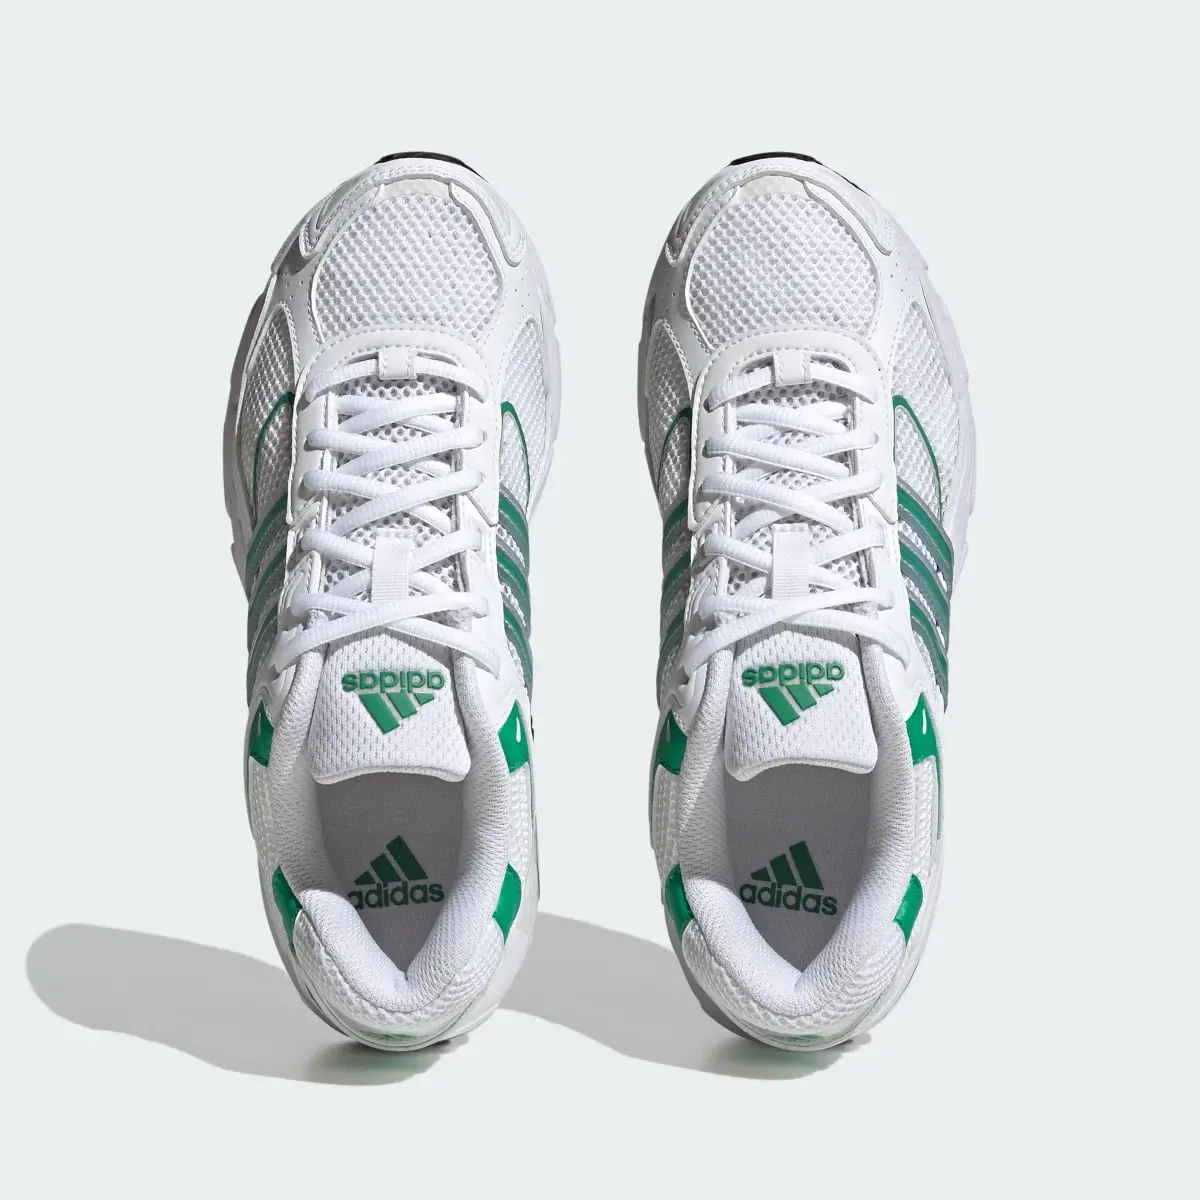 Adidas Chaussure Response CL. 3